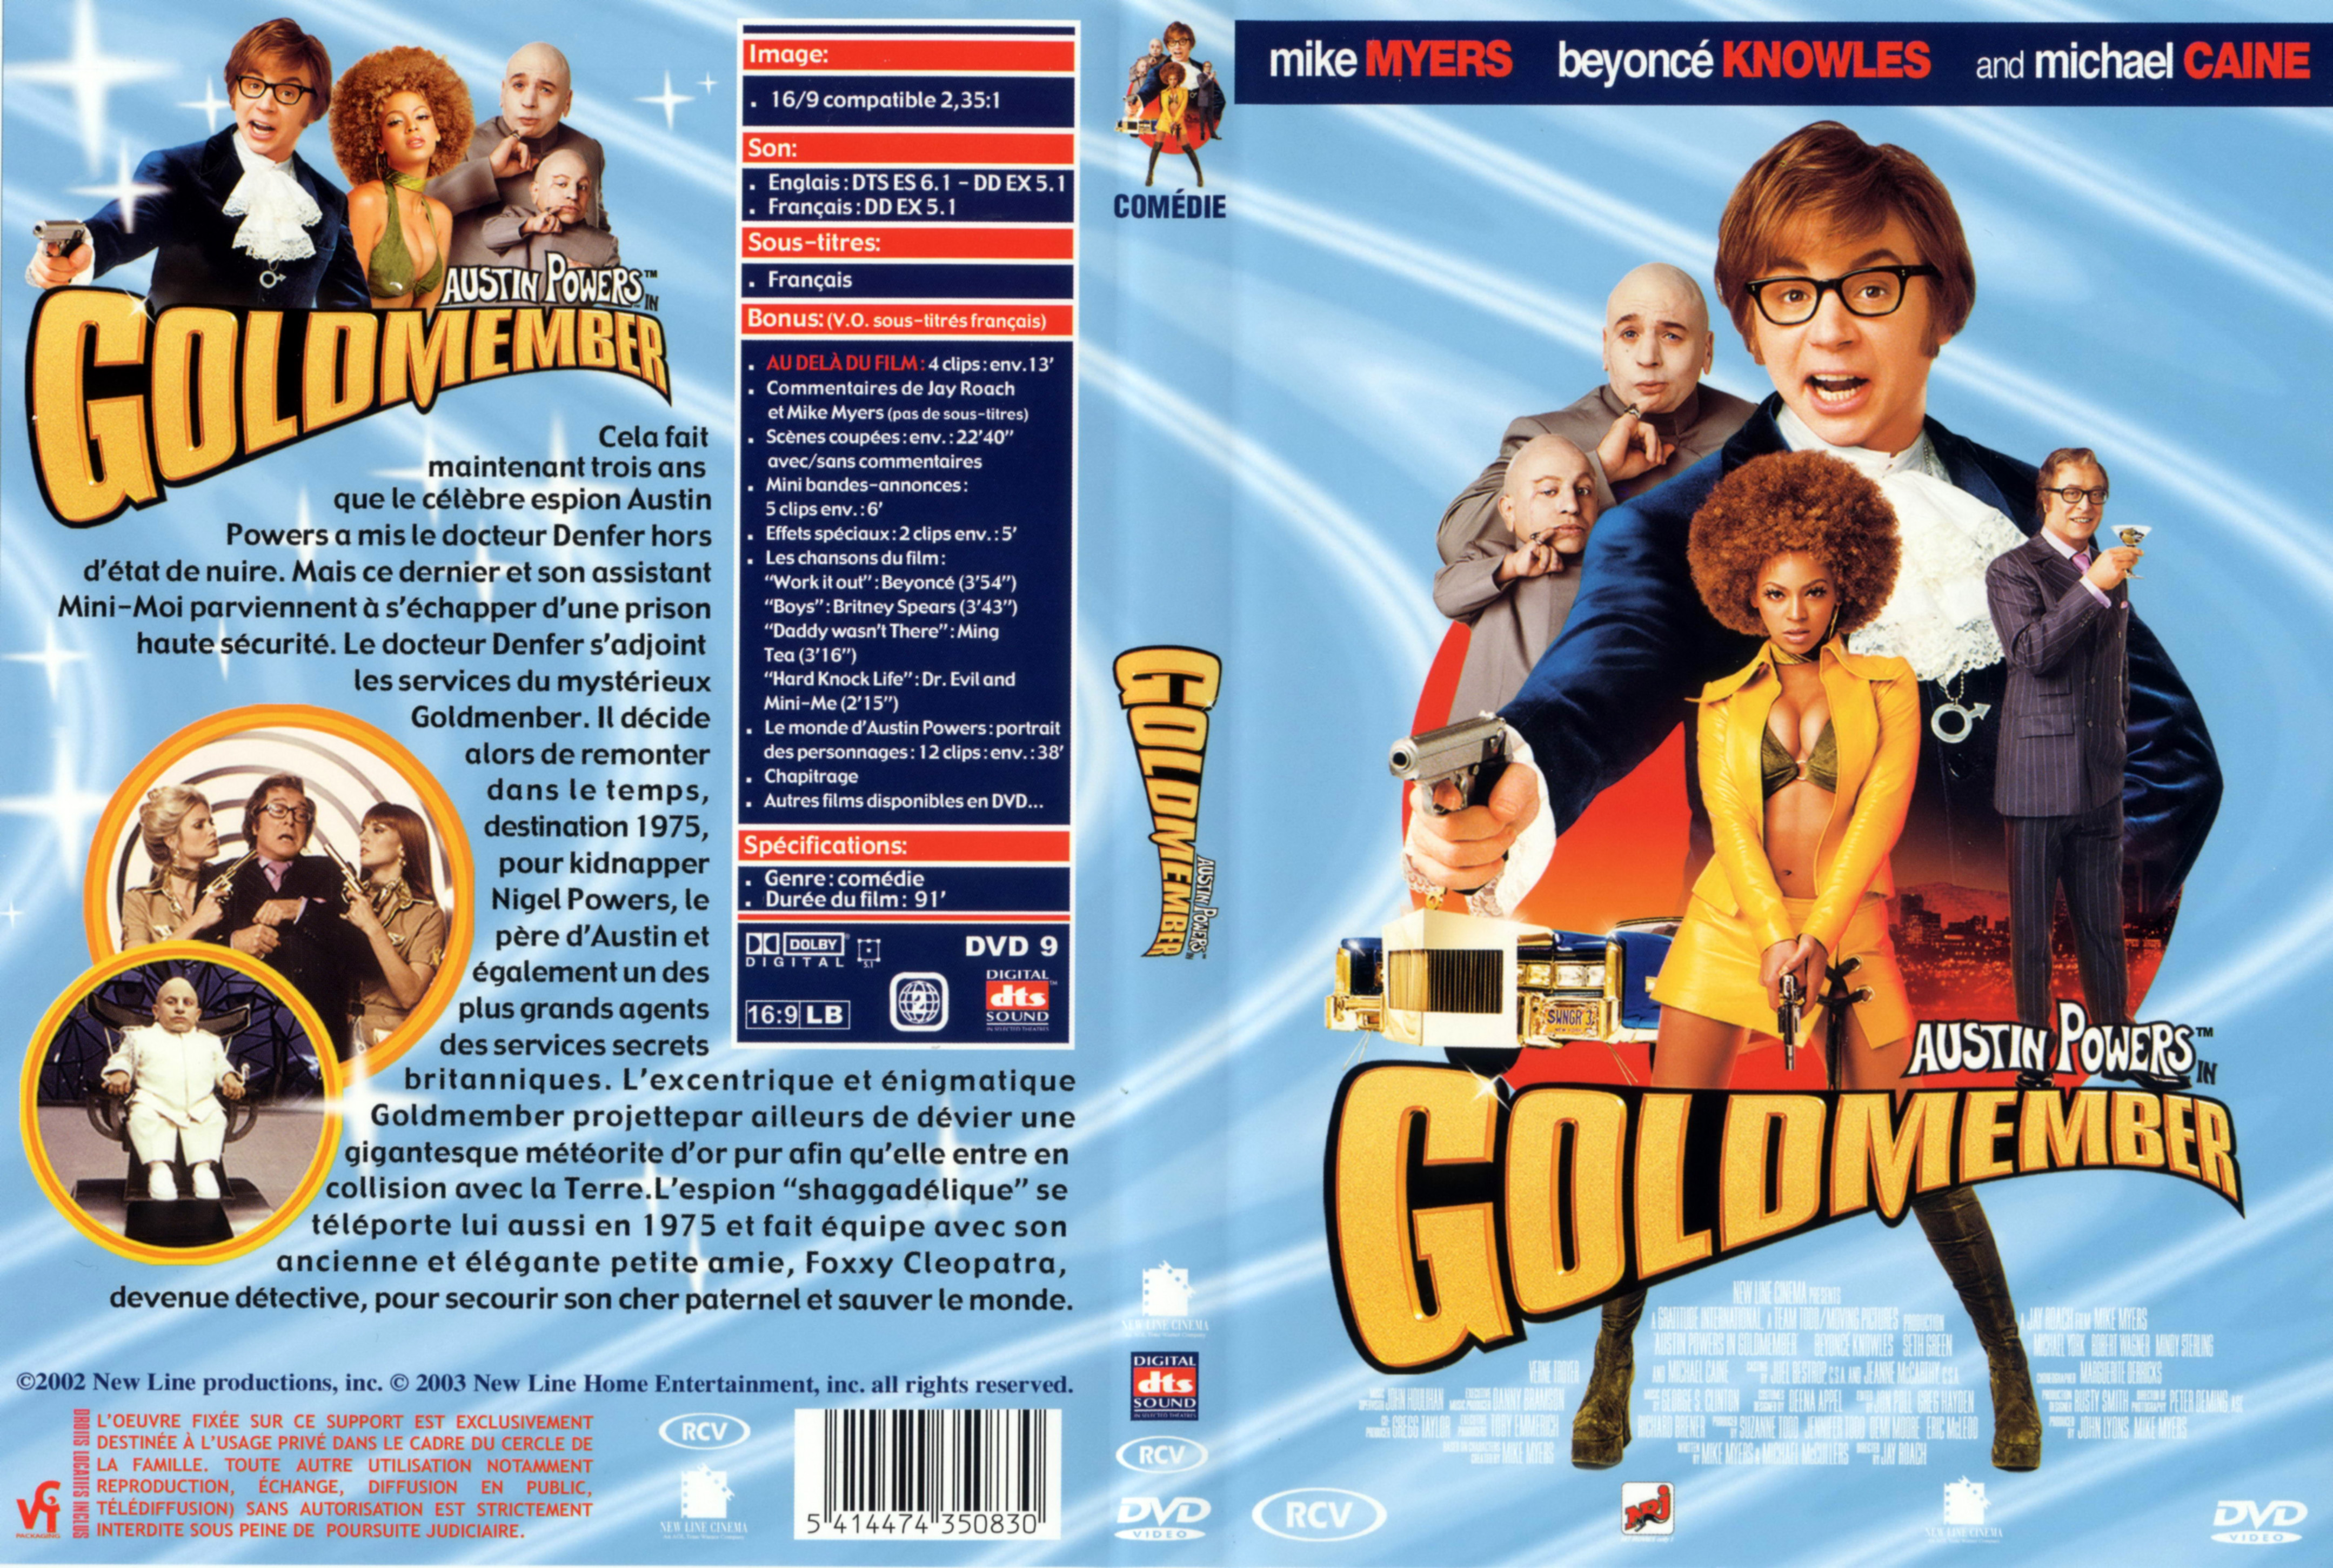 Jaquette DVD Austin Powers in Goldmember v2